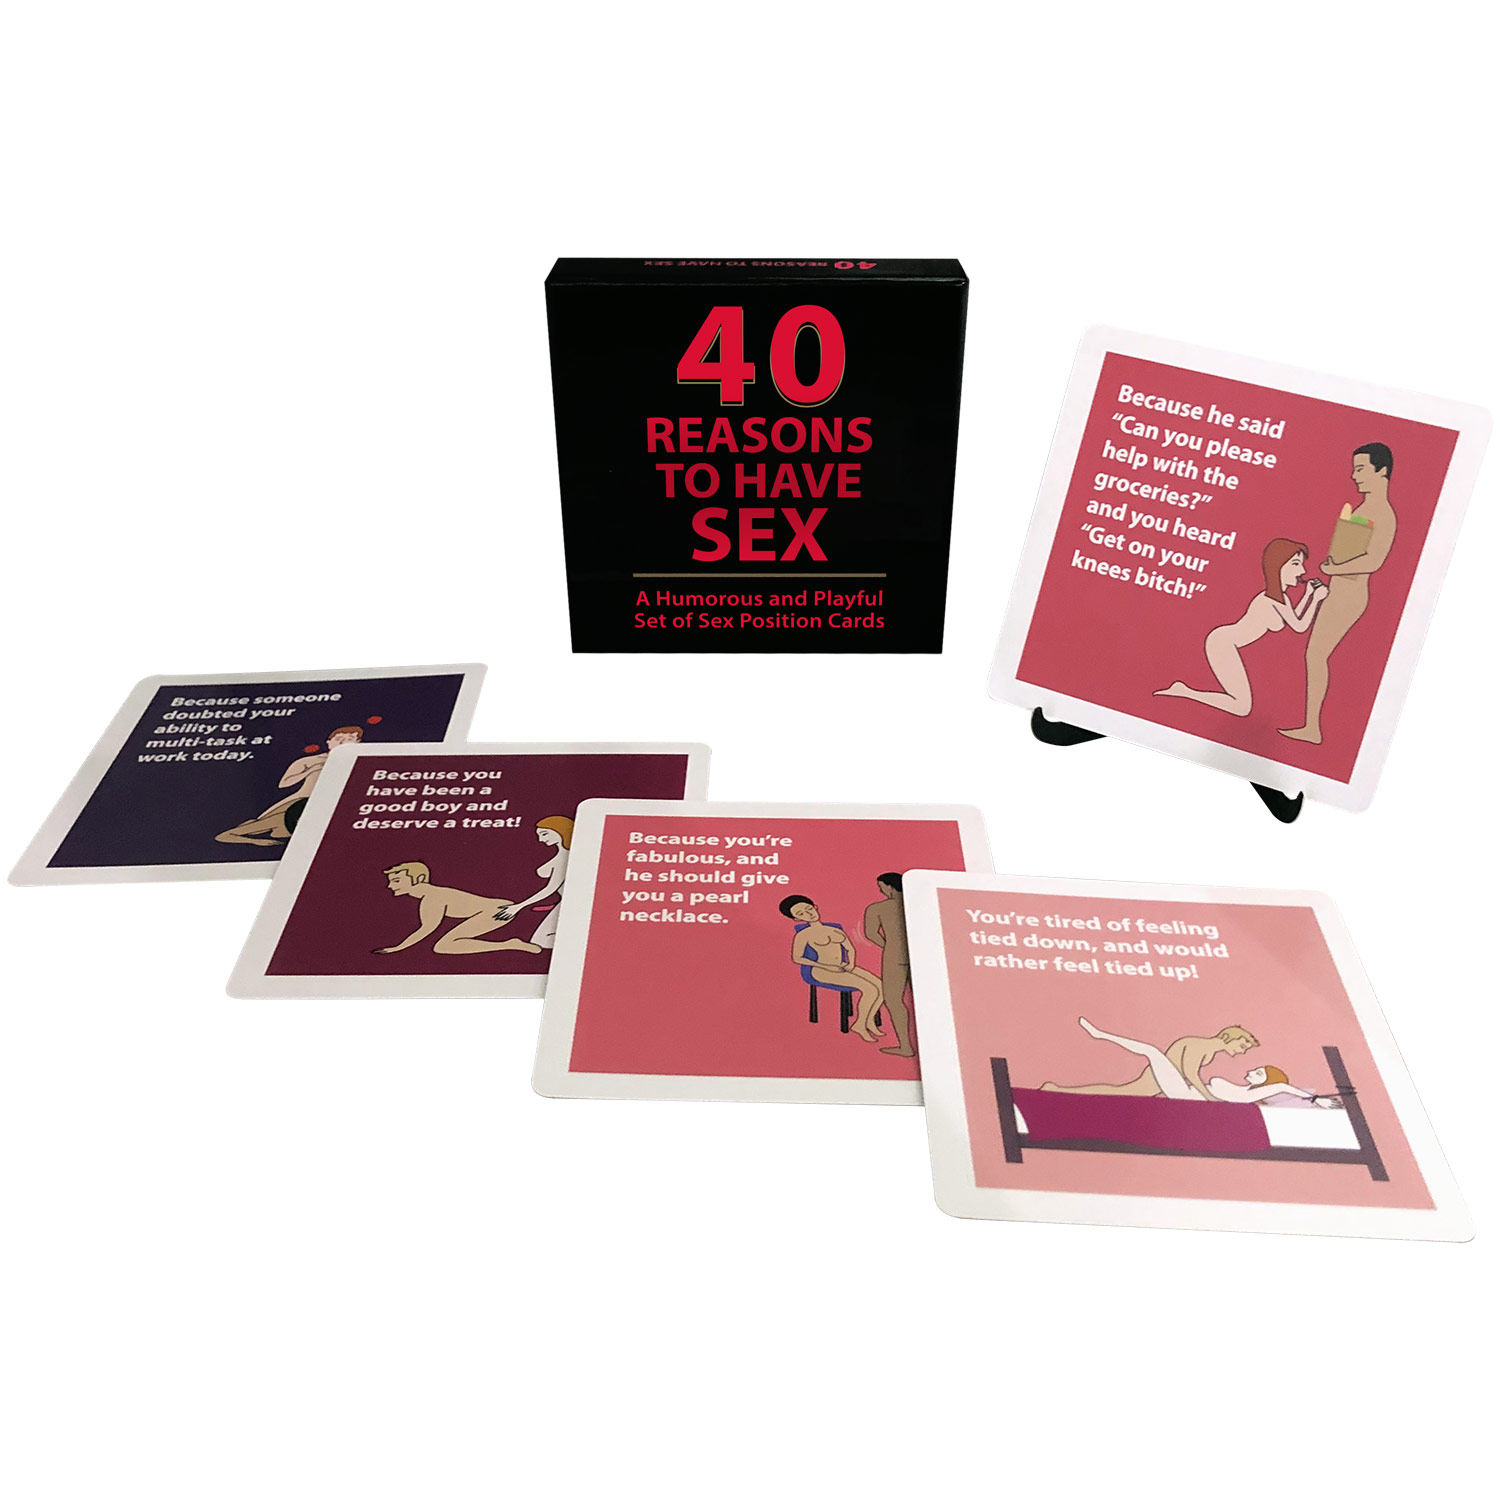 40 REASONS TO HAVE SEX